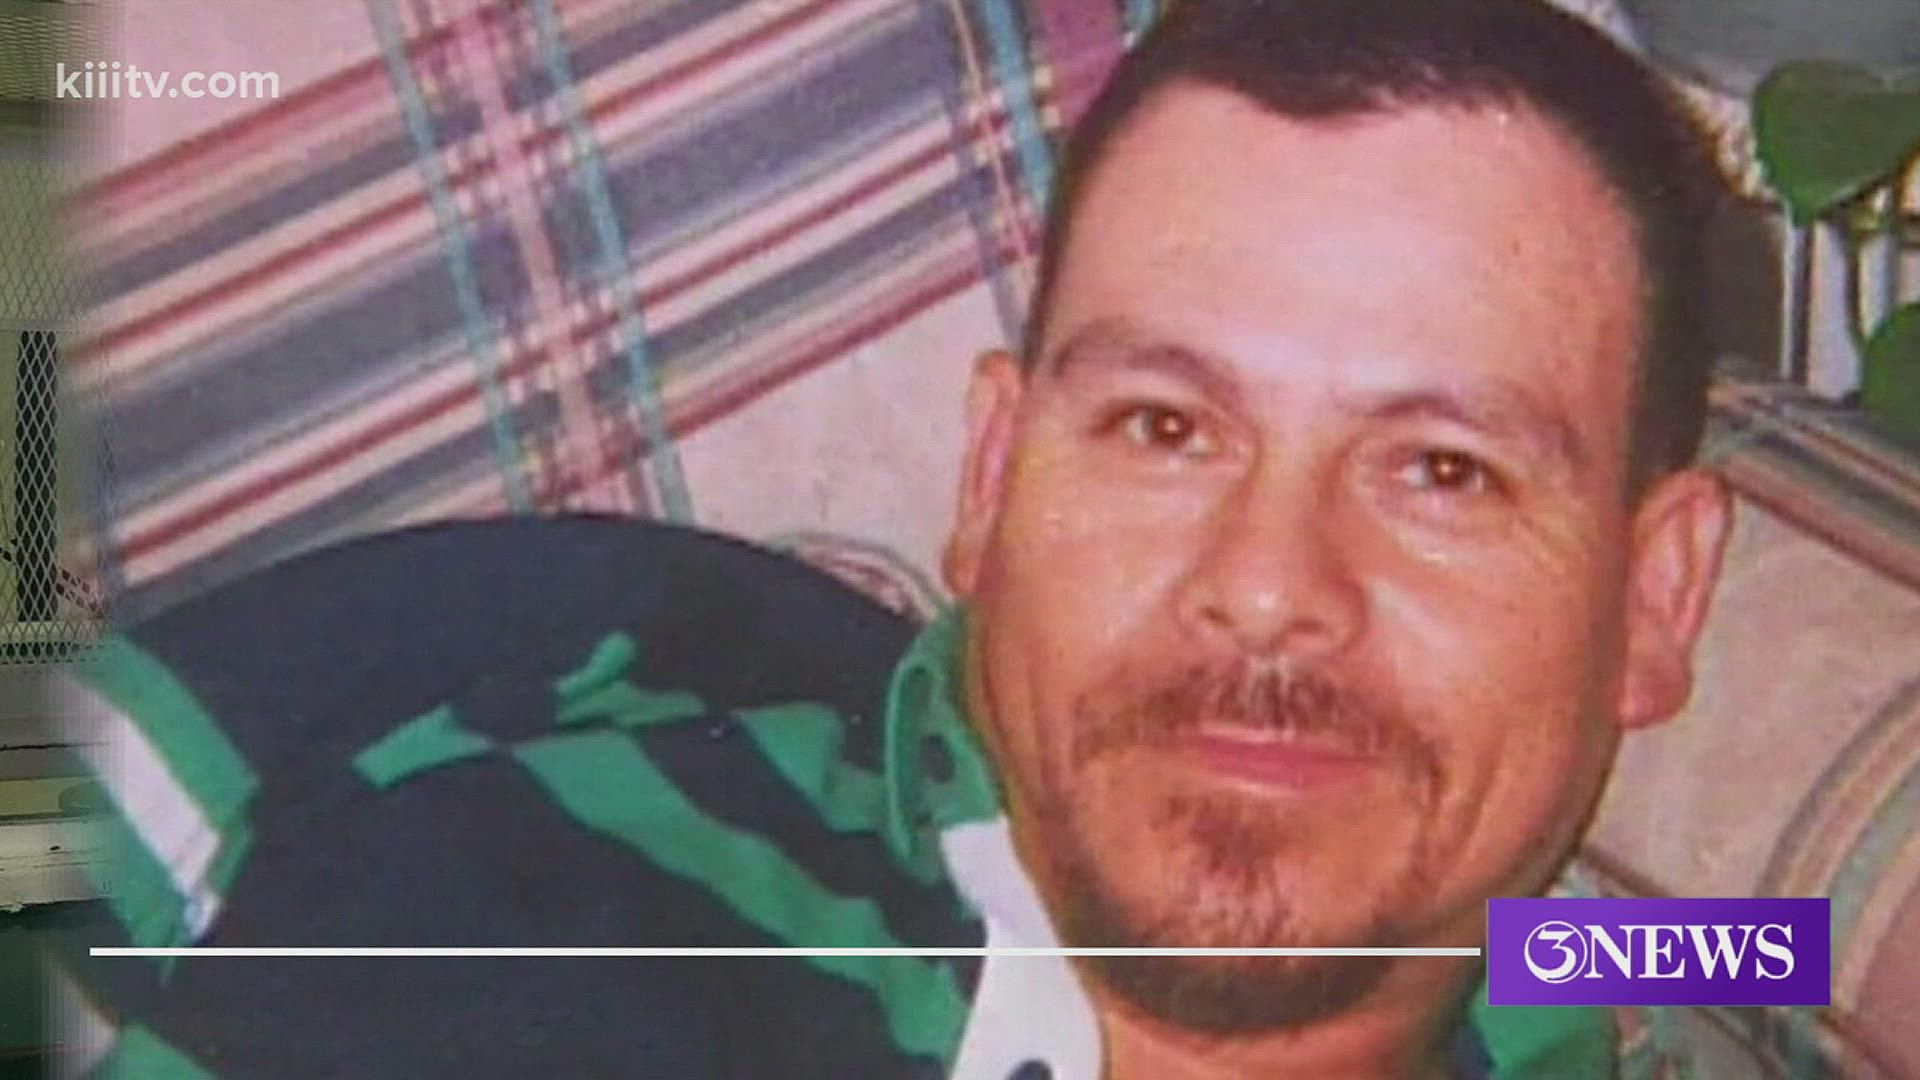 A request by John Henry Ramirez to have Pastor Dana Moore of Corpus Christi's Second Baptist Church lay his hands on him while he dies was denied.